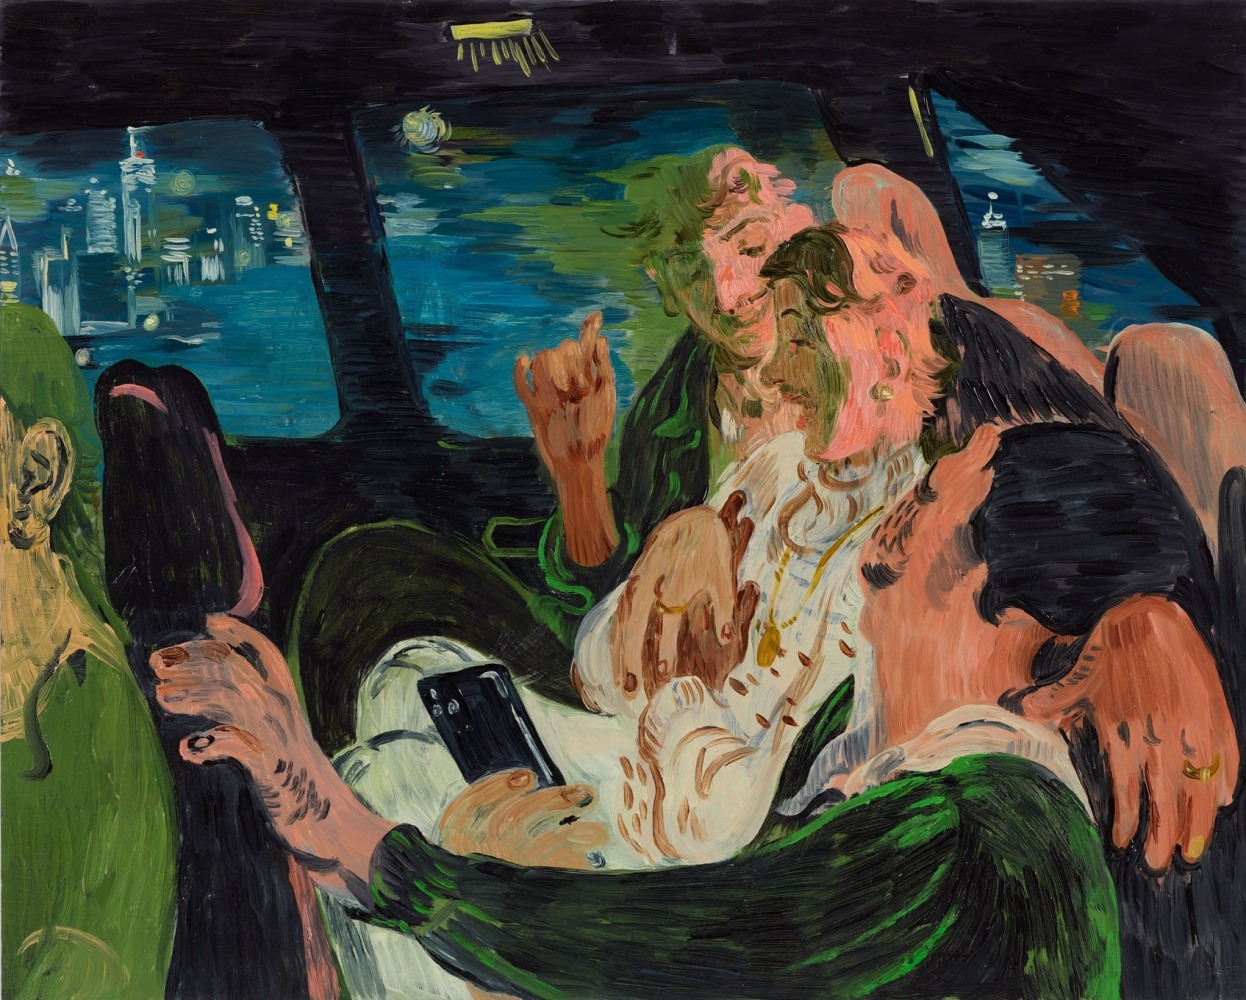 Salman Toor
Three Friends in a Cab, 2021
Oil on panel
16 x 20 inches
(40.6 x 50.8 cm)